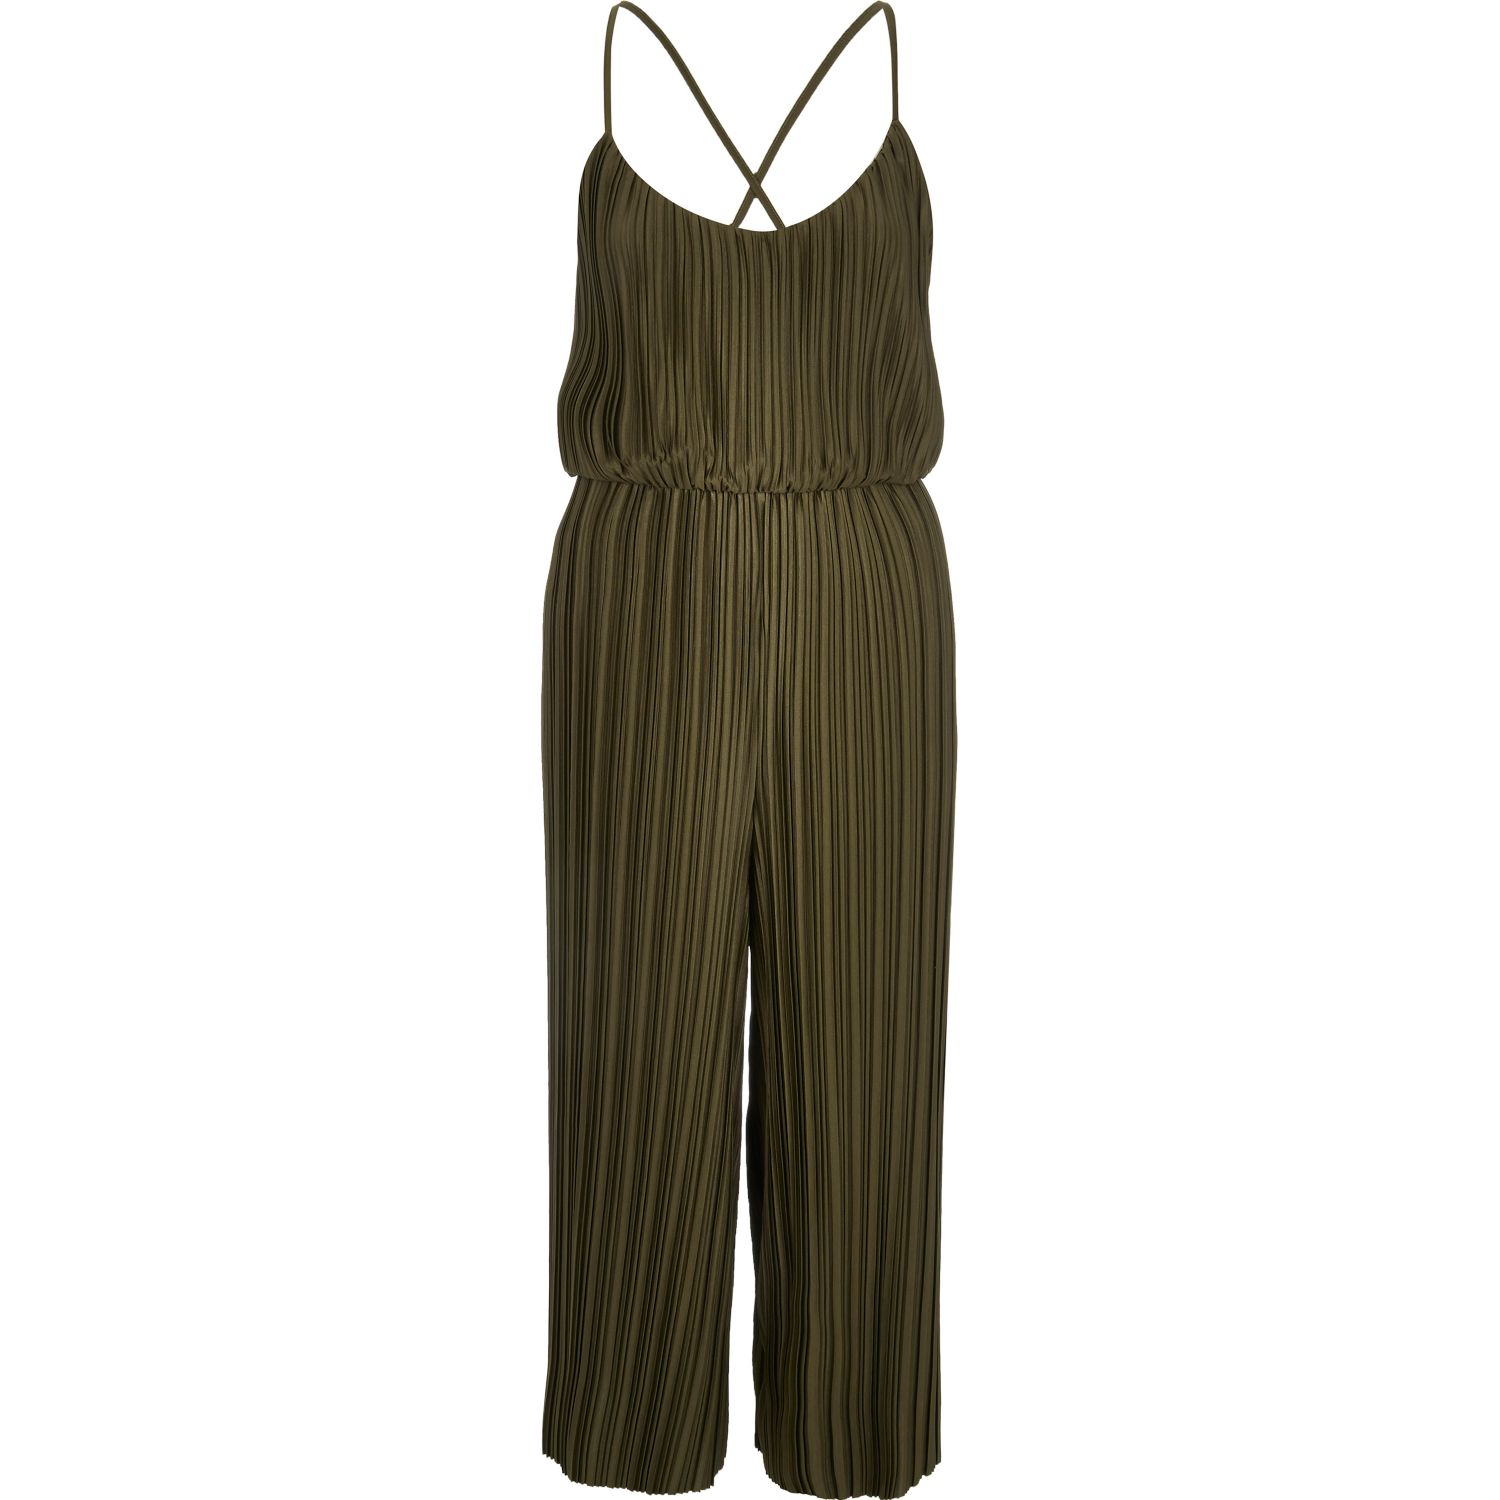 Lyst - River Island Khaki Pleated Jumpsuit in Natural